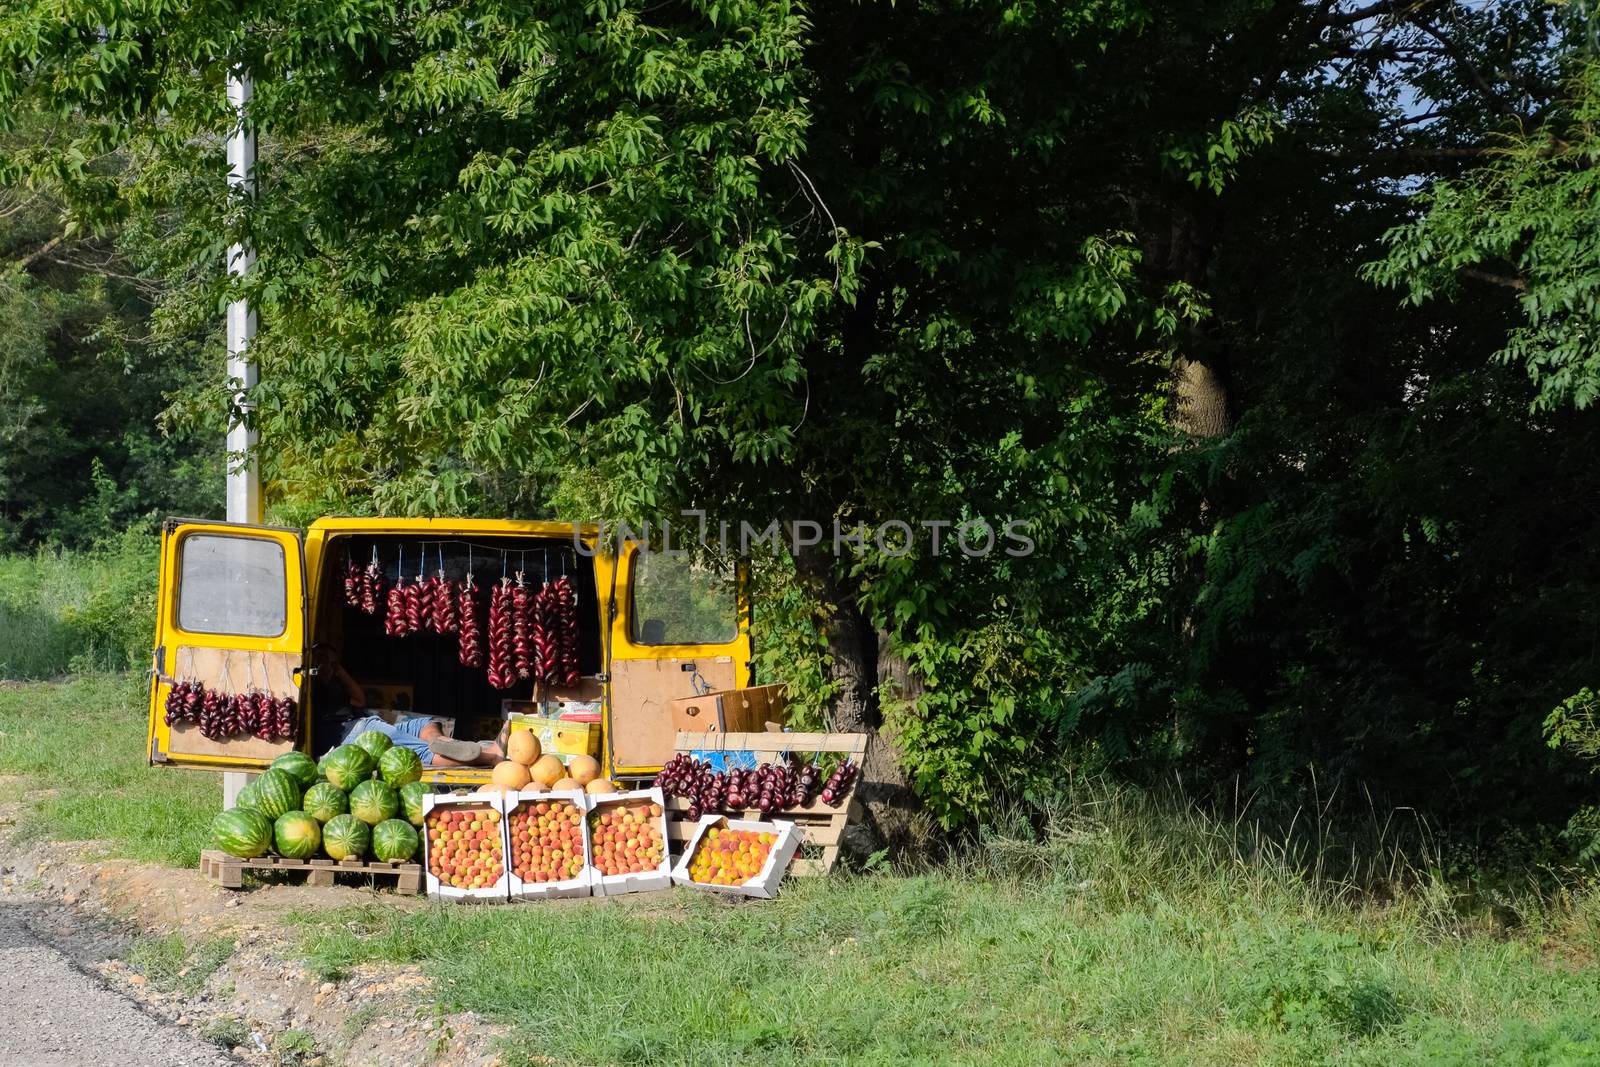 Selling vegetables and watermelons by the road. Resort shops by the road for tourists.